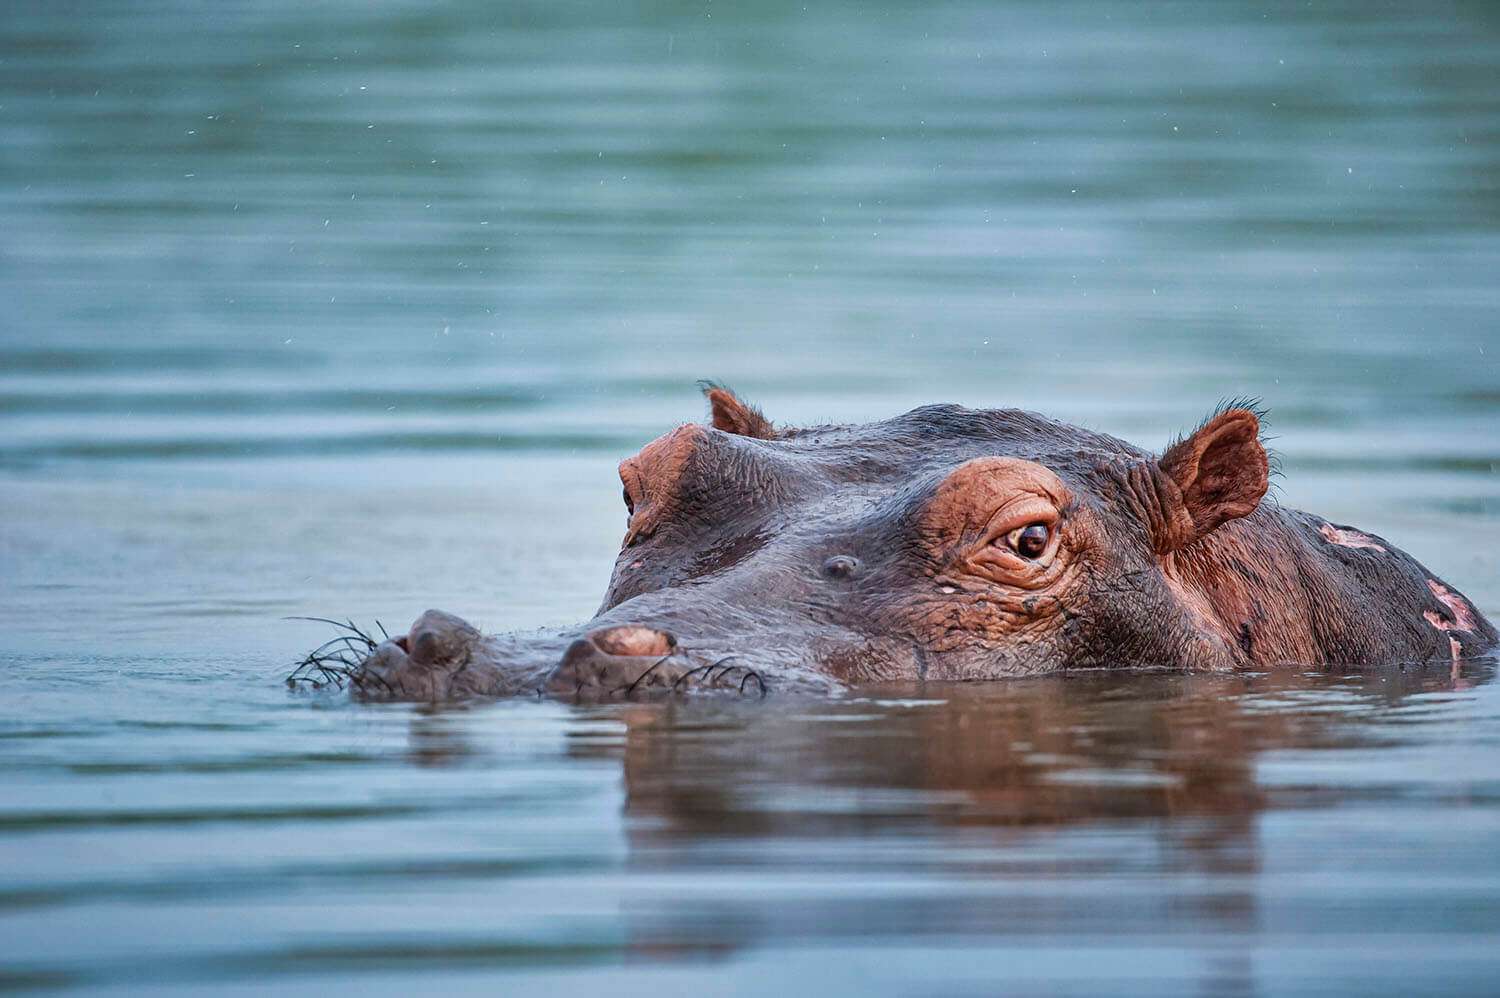 Hippo in water